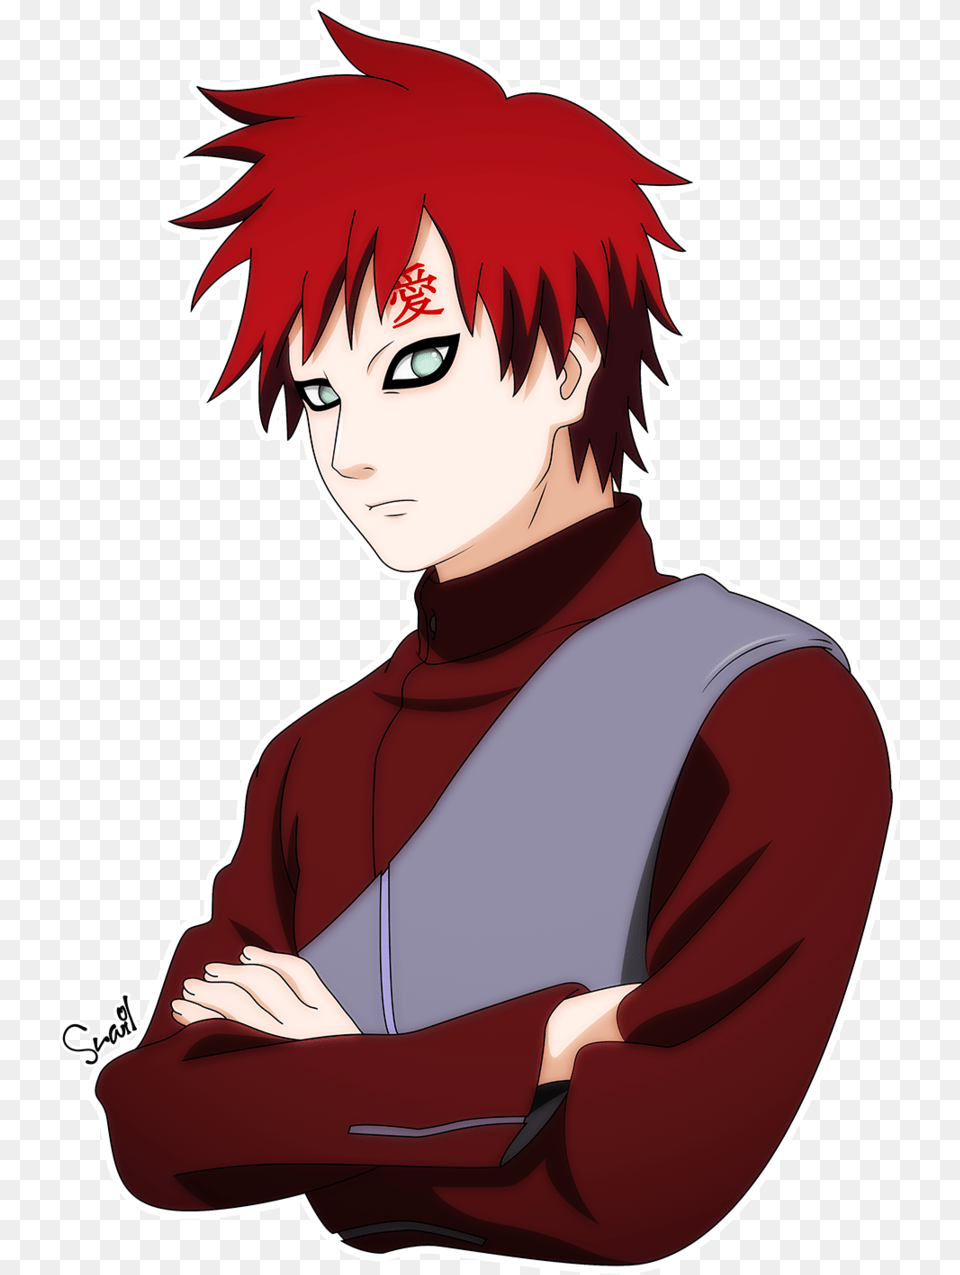 Cool Kazekage By Abaoabao Clipart Royalty Gaara Cool, Publication, Book, Comics, Person Png